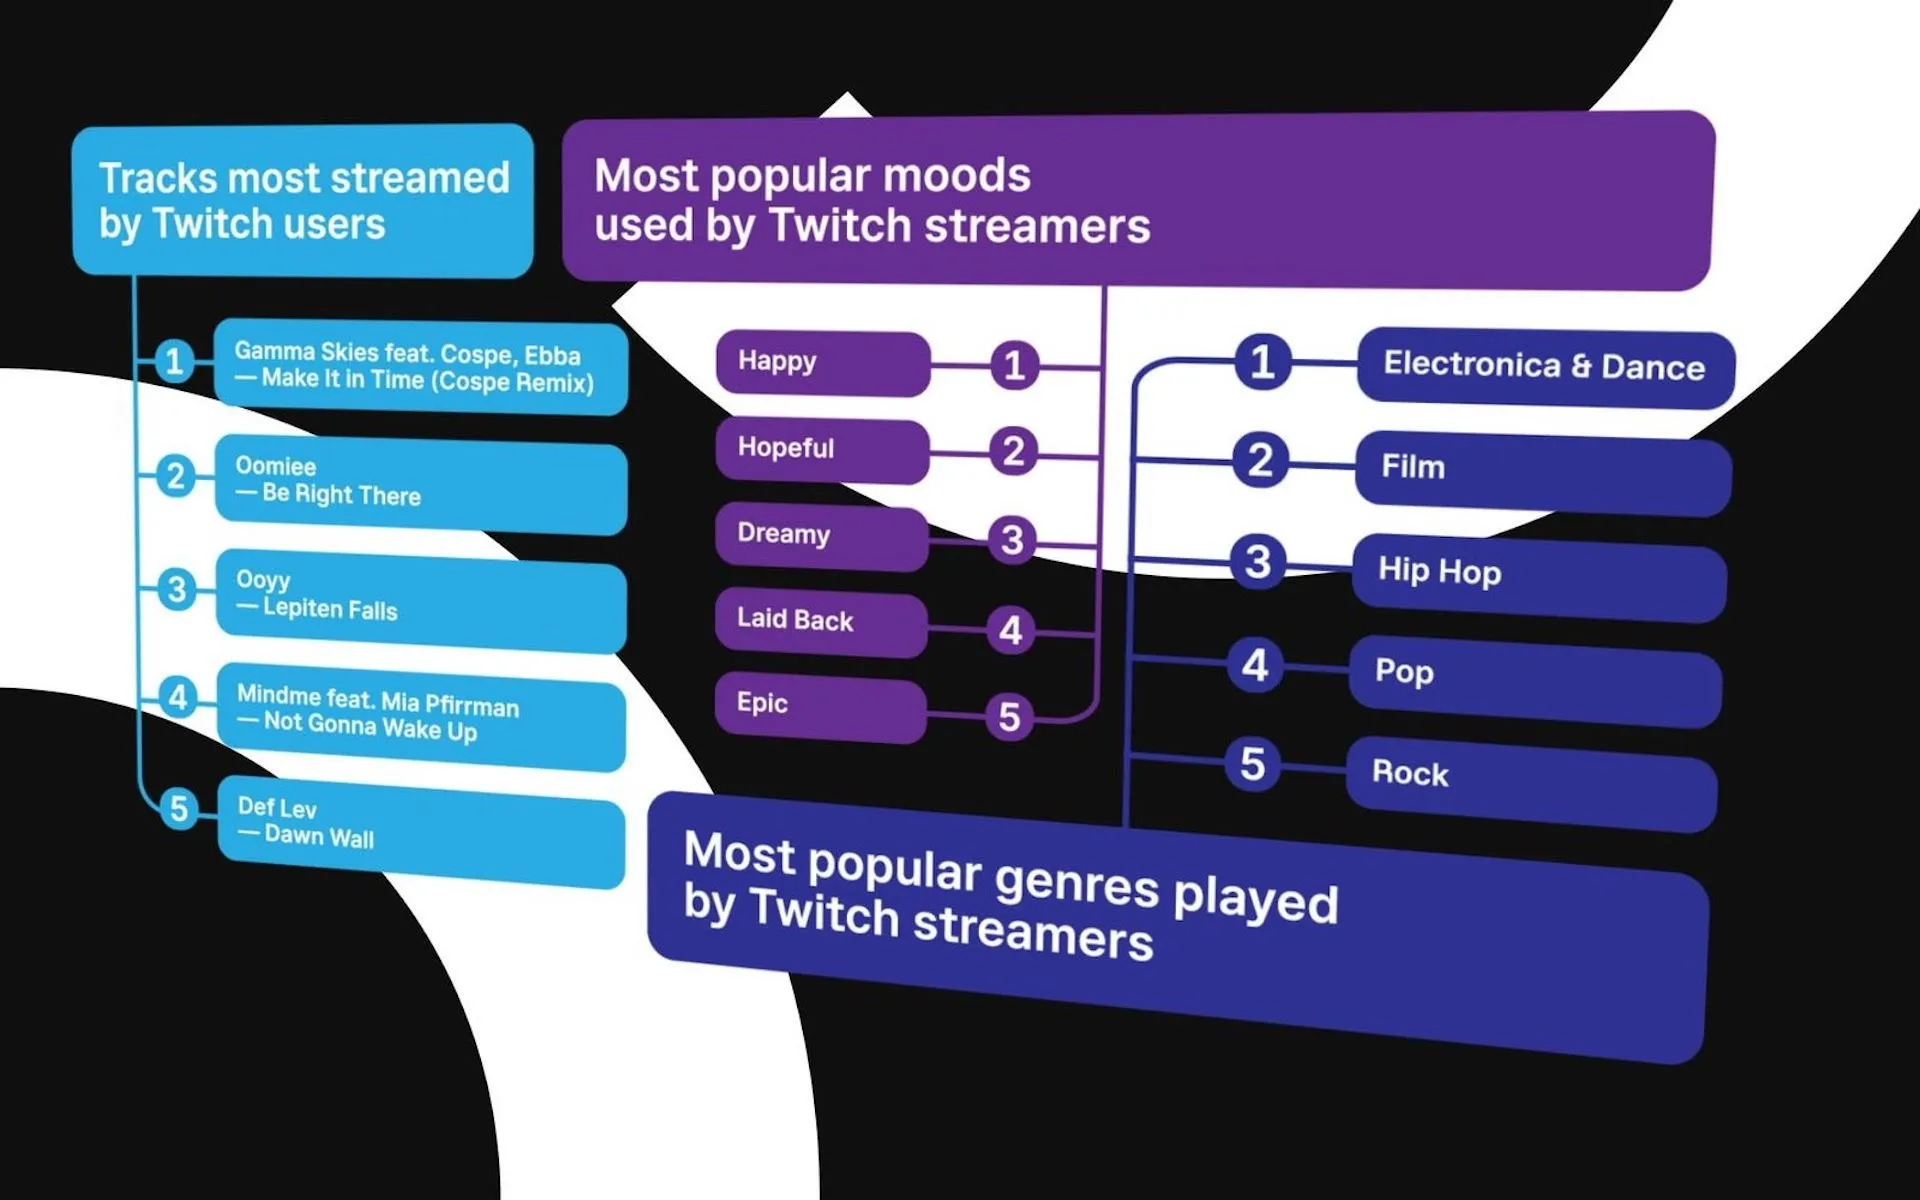 Top tracks used by Twitch streamers